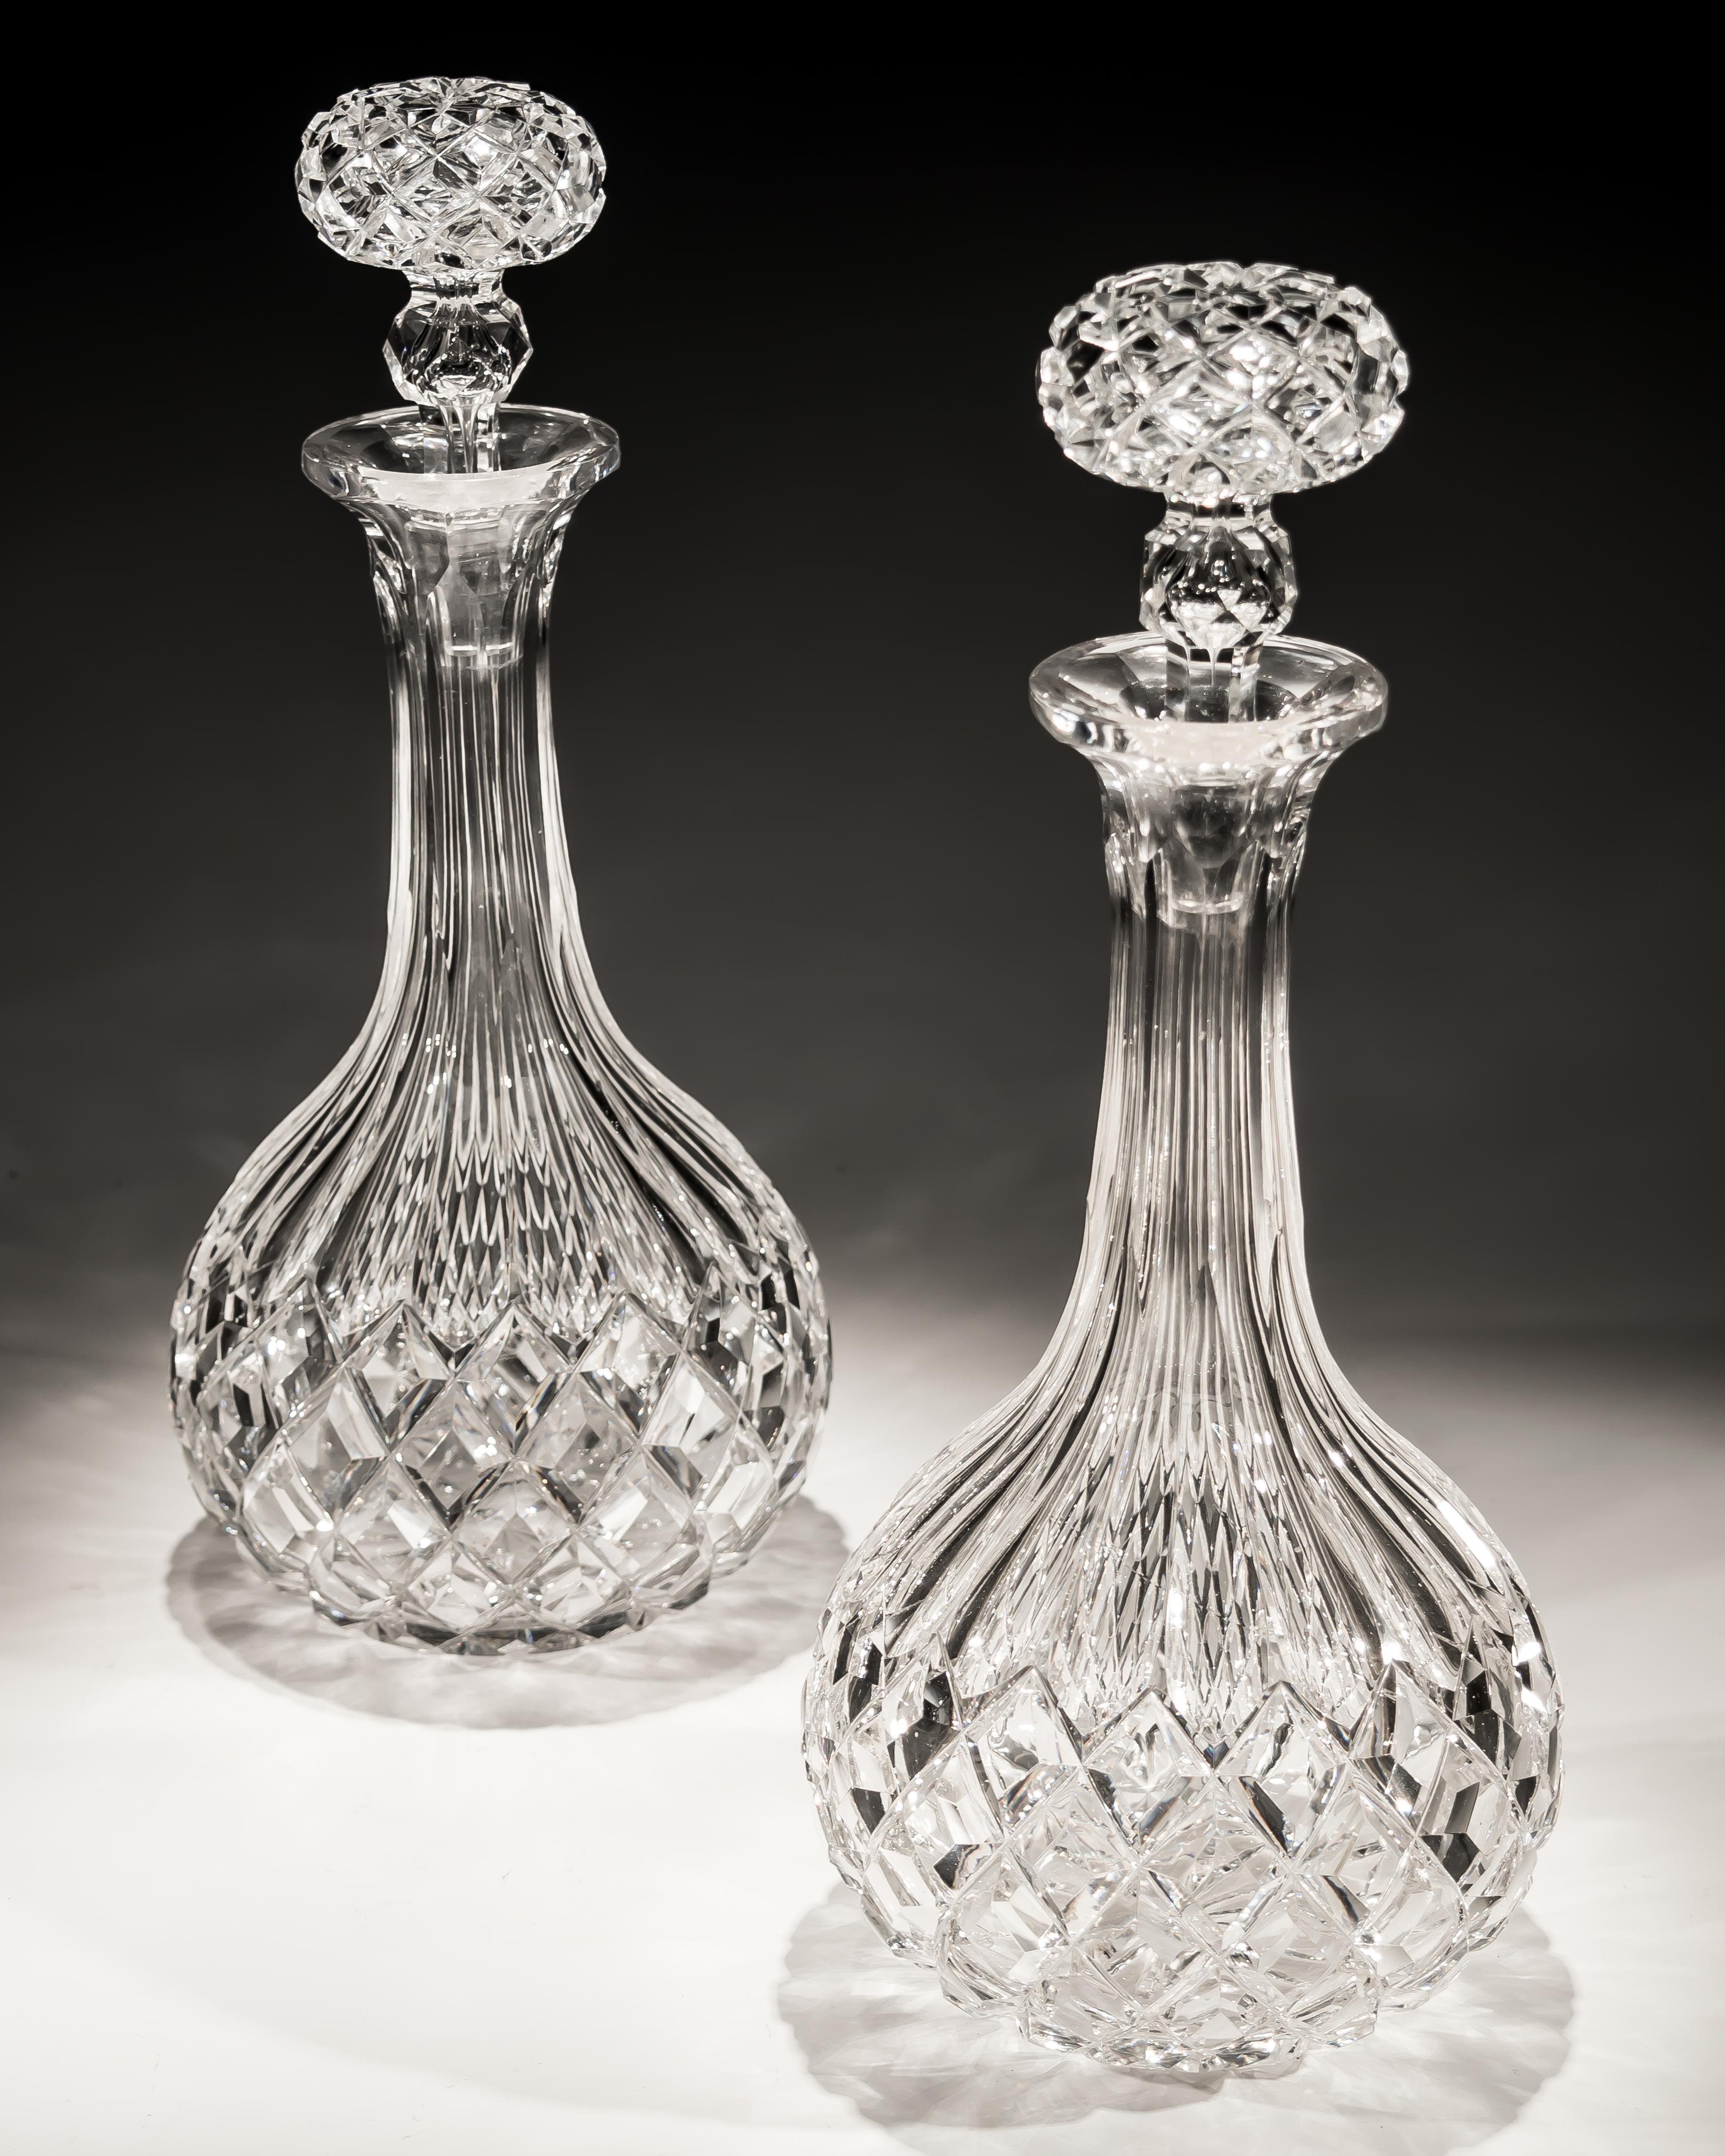 A pair of shaft and globe flat diamond cut Victorian decanters.